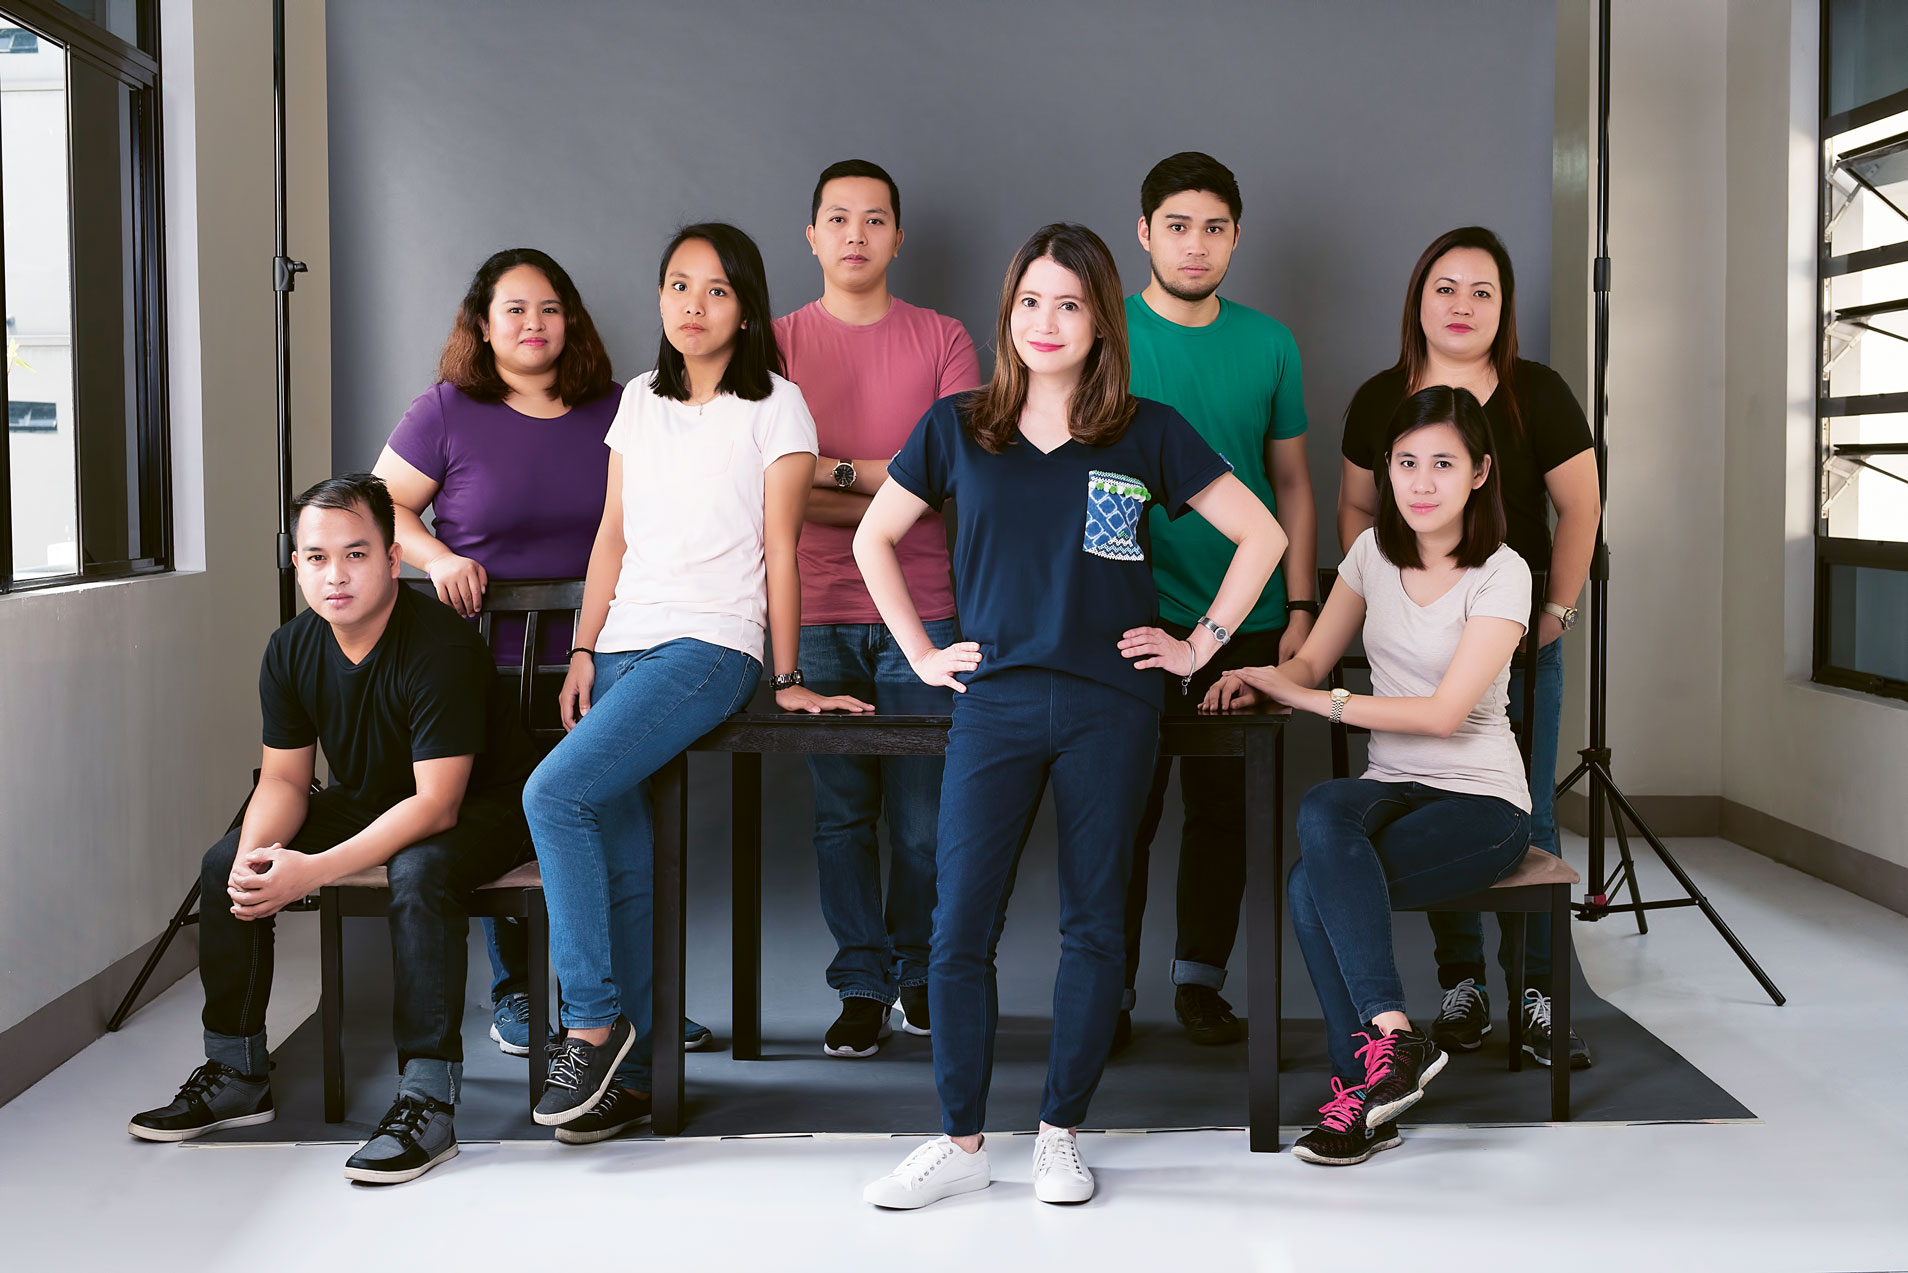 The Department of Agriculture dream team led by Berna Romulo-Puyat